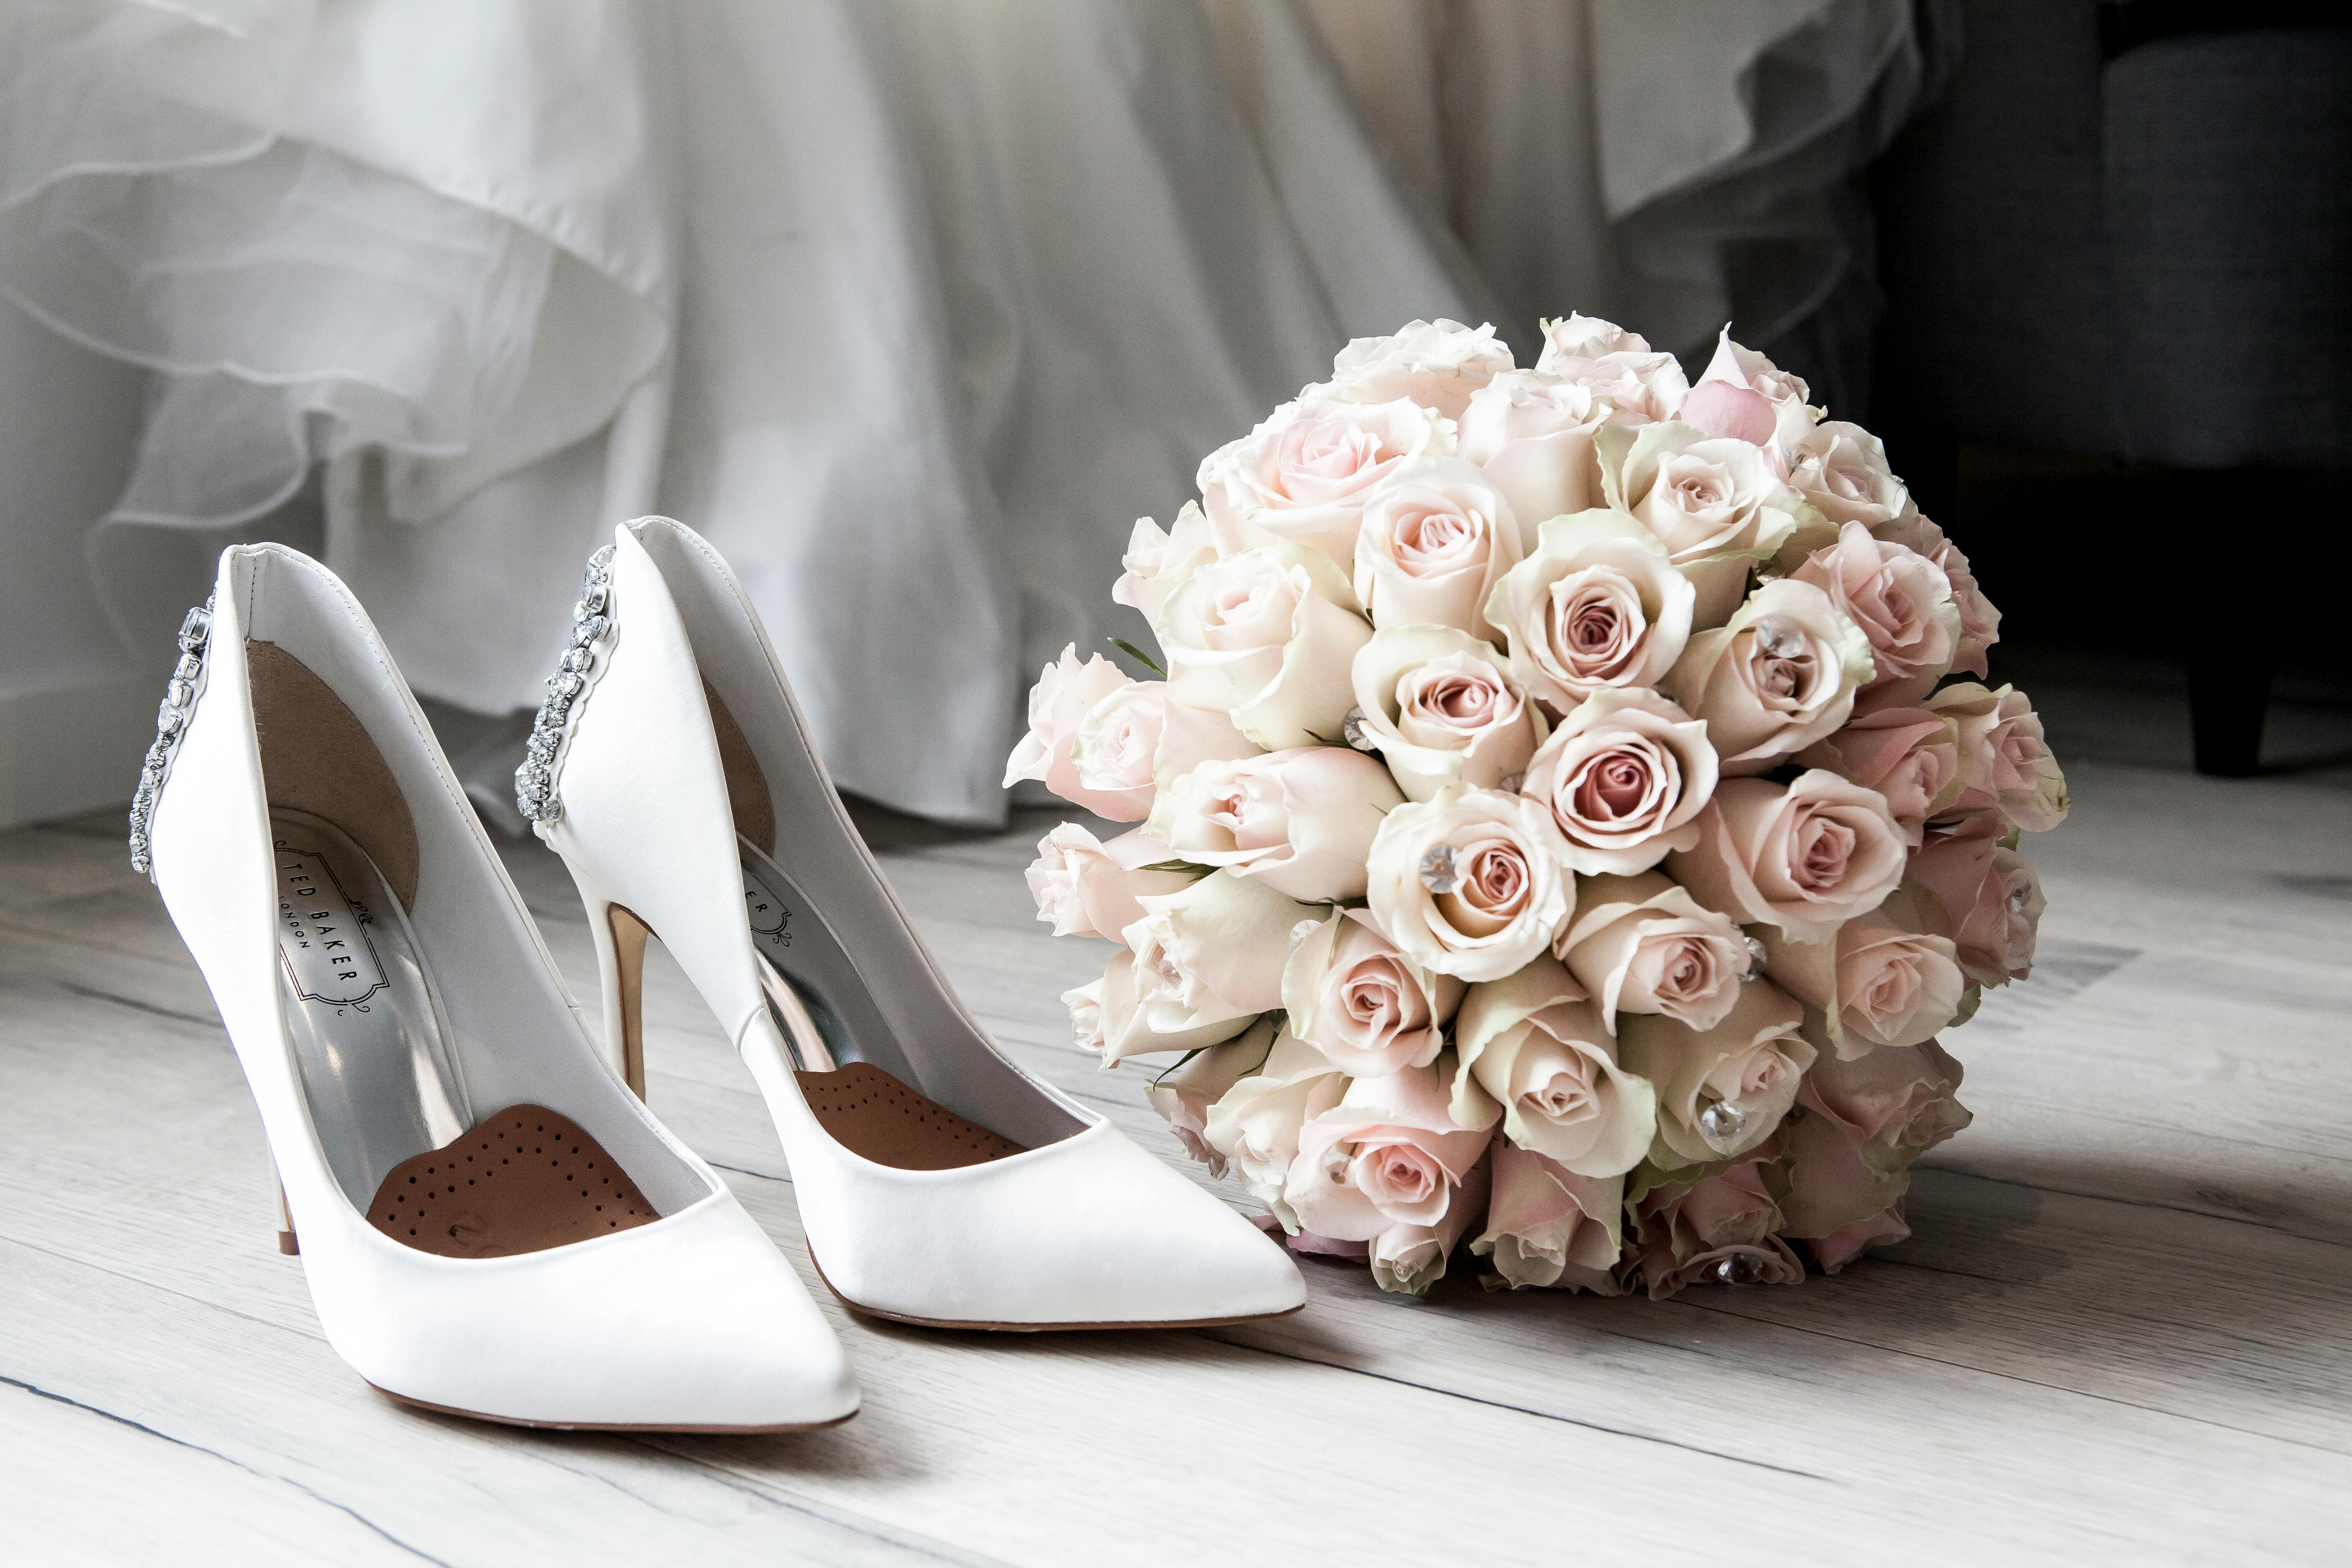 A pair of wedding shoes and a wedding bouquet | Source: Pexels